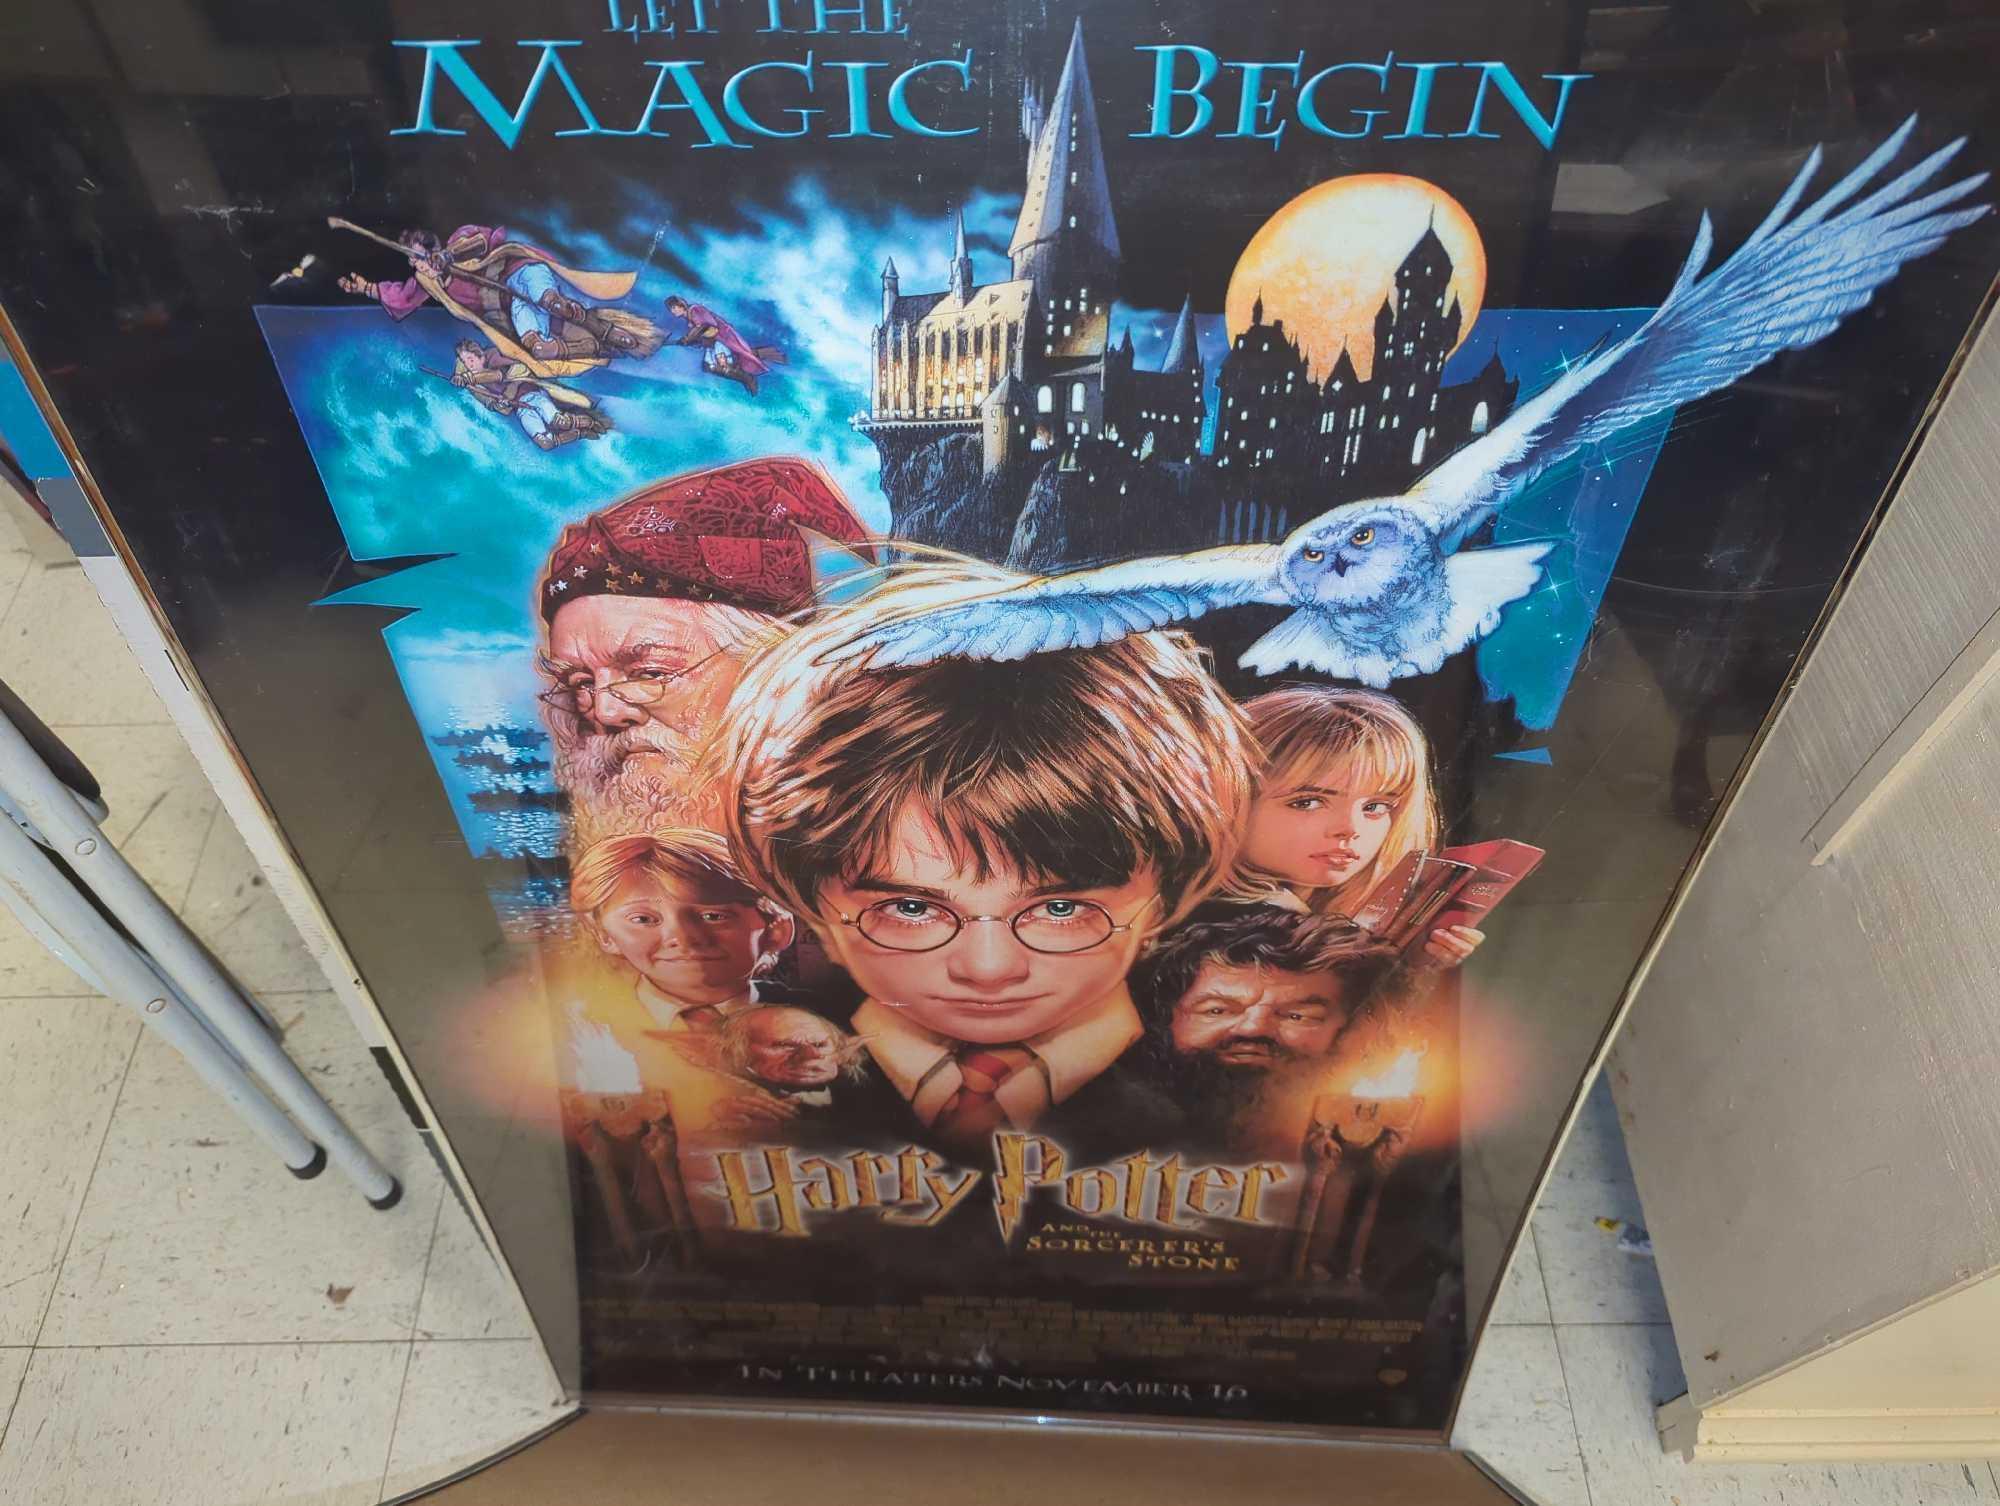 Lot of 2 "Harry Potter and the Sorcerer's Stone" Movie Posters, Approximate Dimensions (Both) - 27"